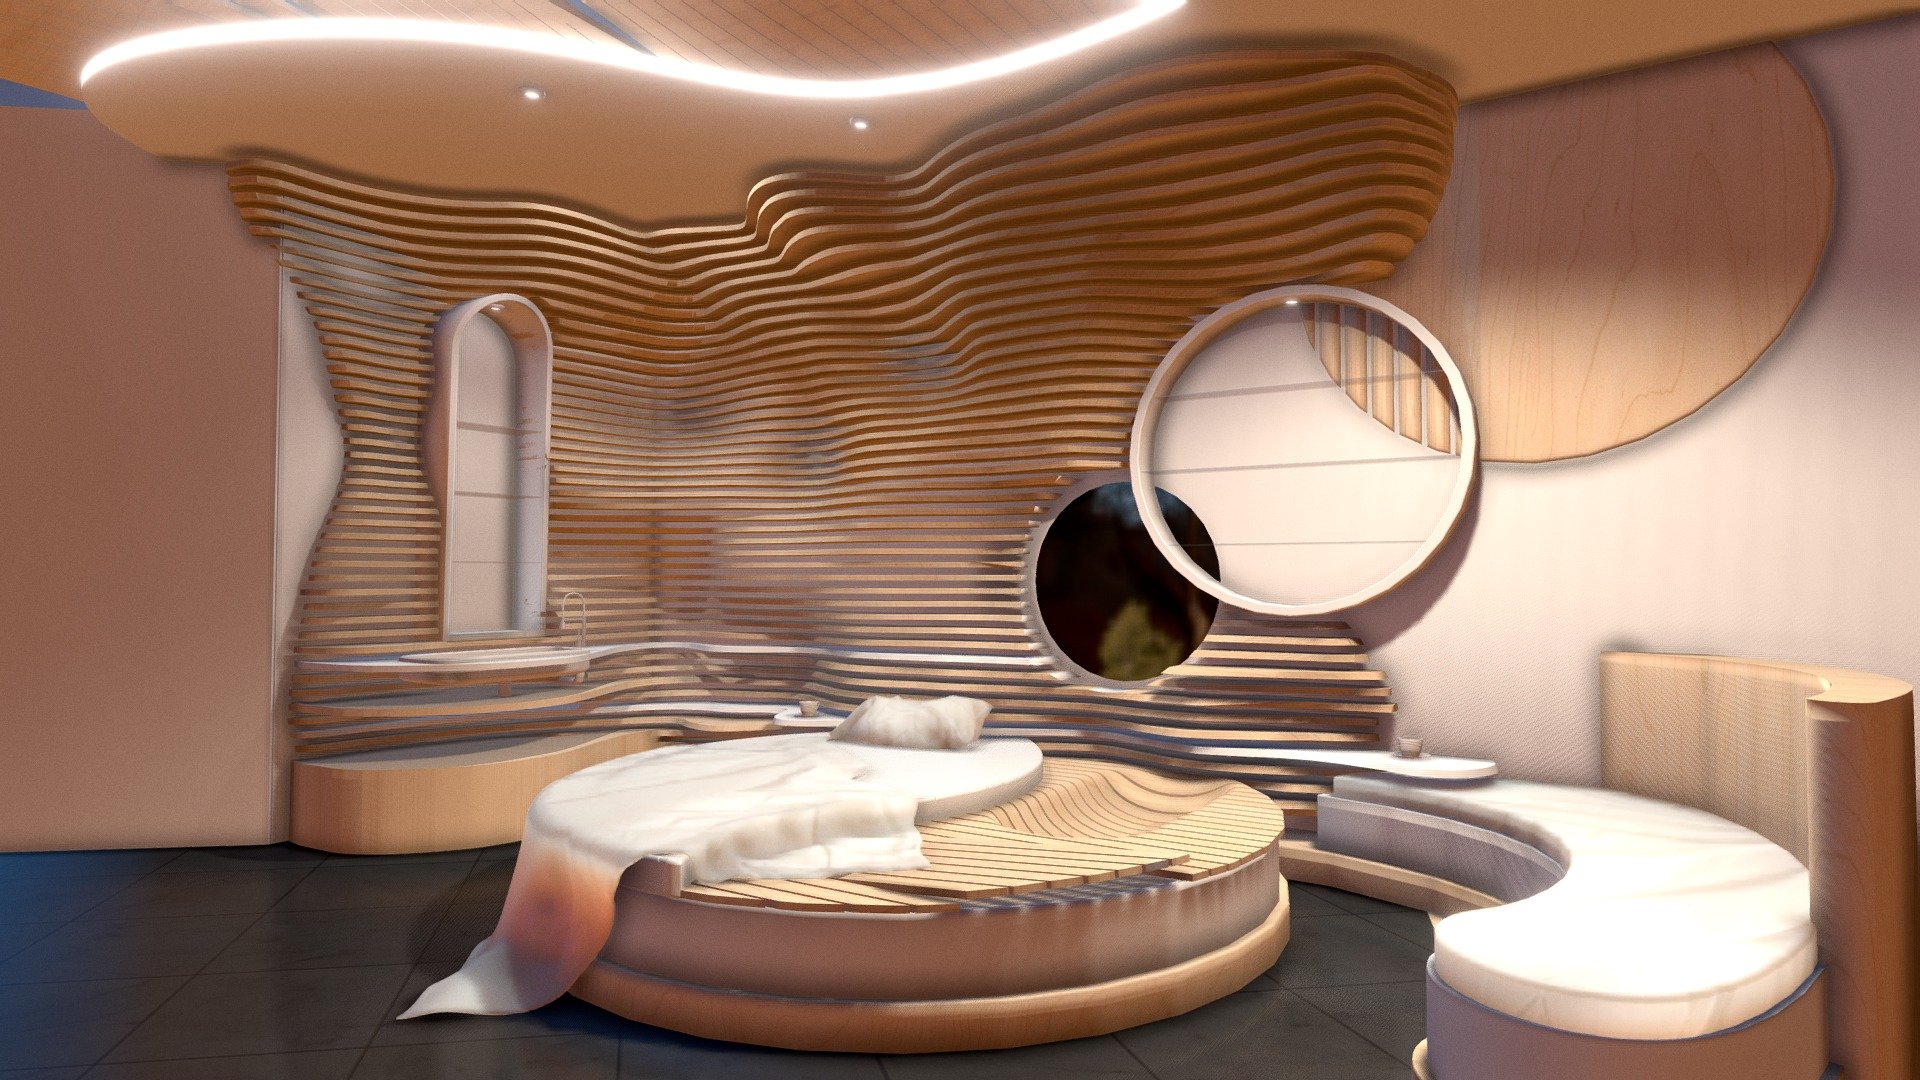 Maternity care room concept
https://www.youtube.com/watch?v=lvZg2gltD9w 


By Haykel Shaba
 - interior concept room wood architecture - Buy Royalty Free 3D model by haykel-shaba (@haykel1993) 3d model